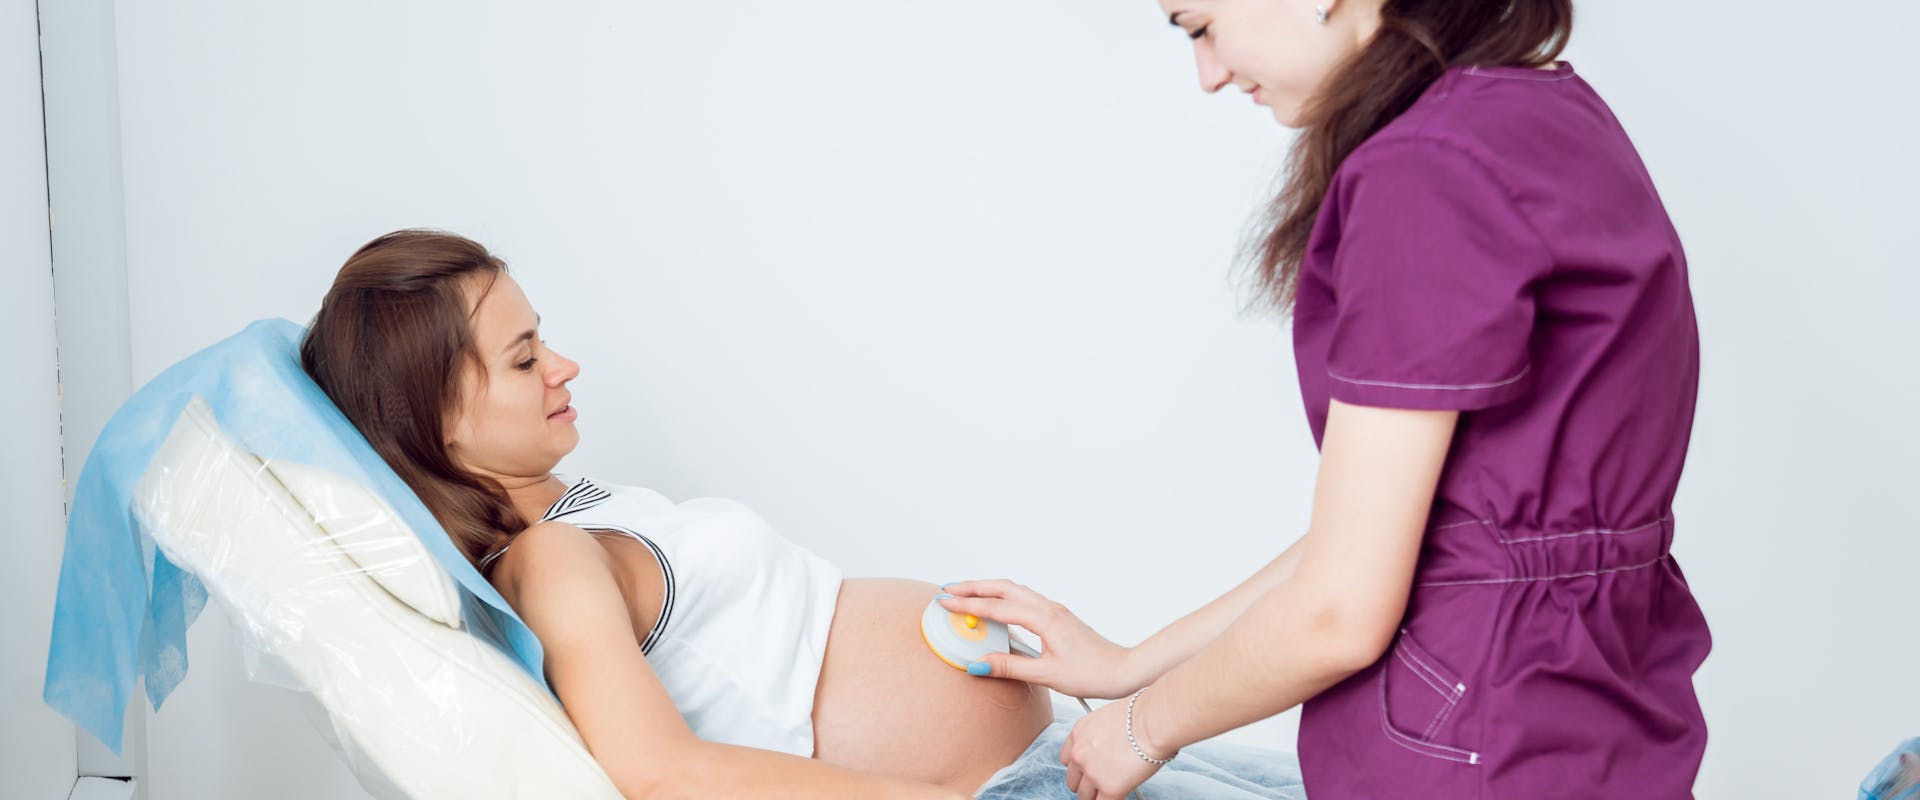 Pregnant woman with electrocardiograph check up for her baby for the purpose of fetal baby monitoring.